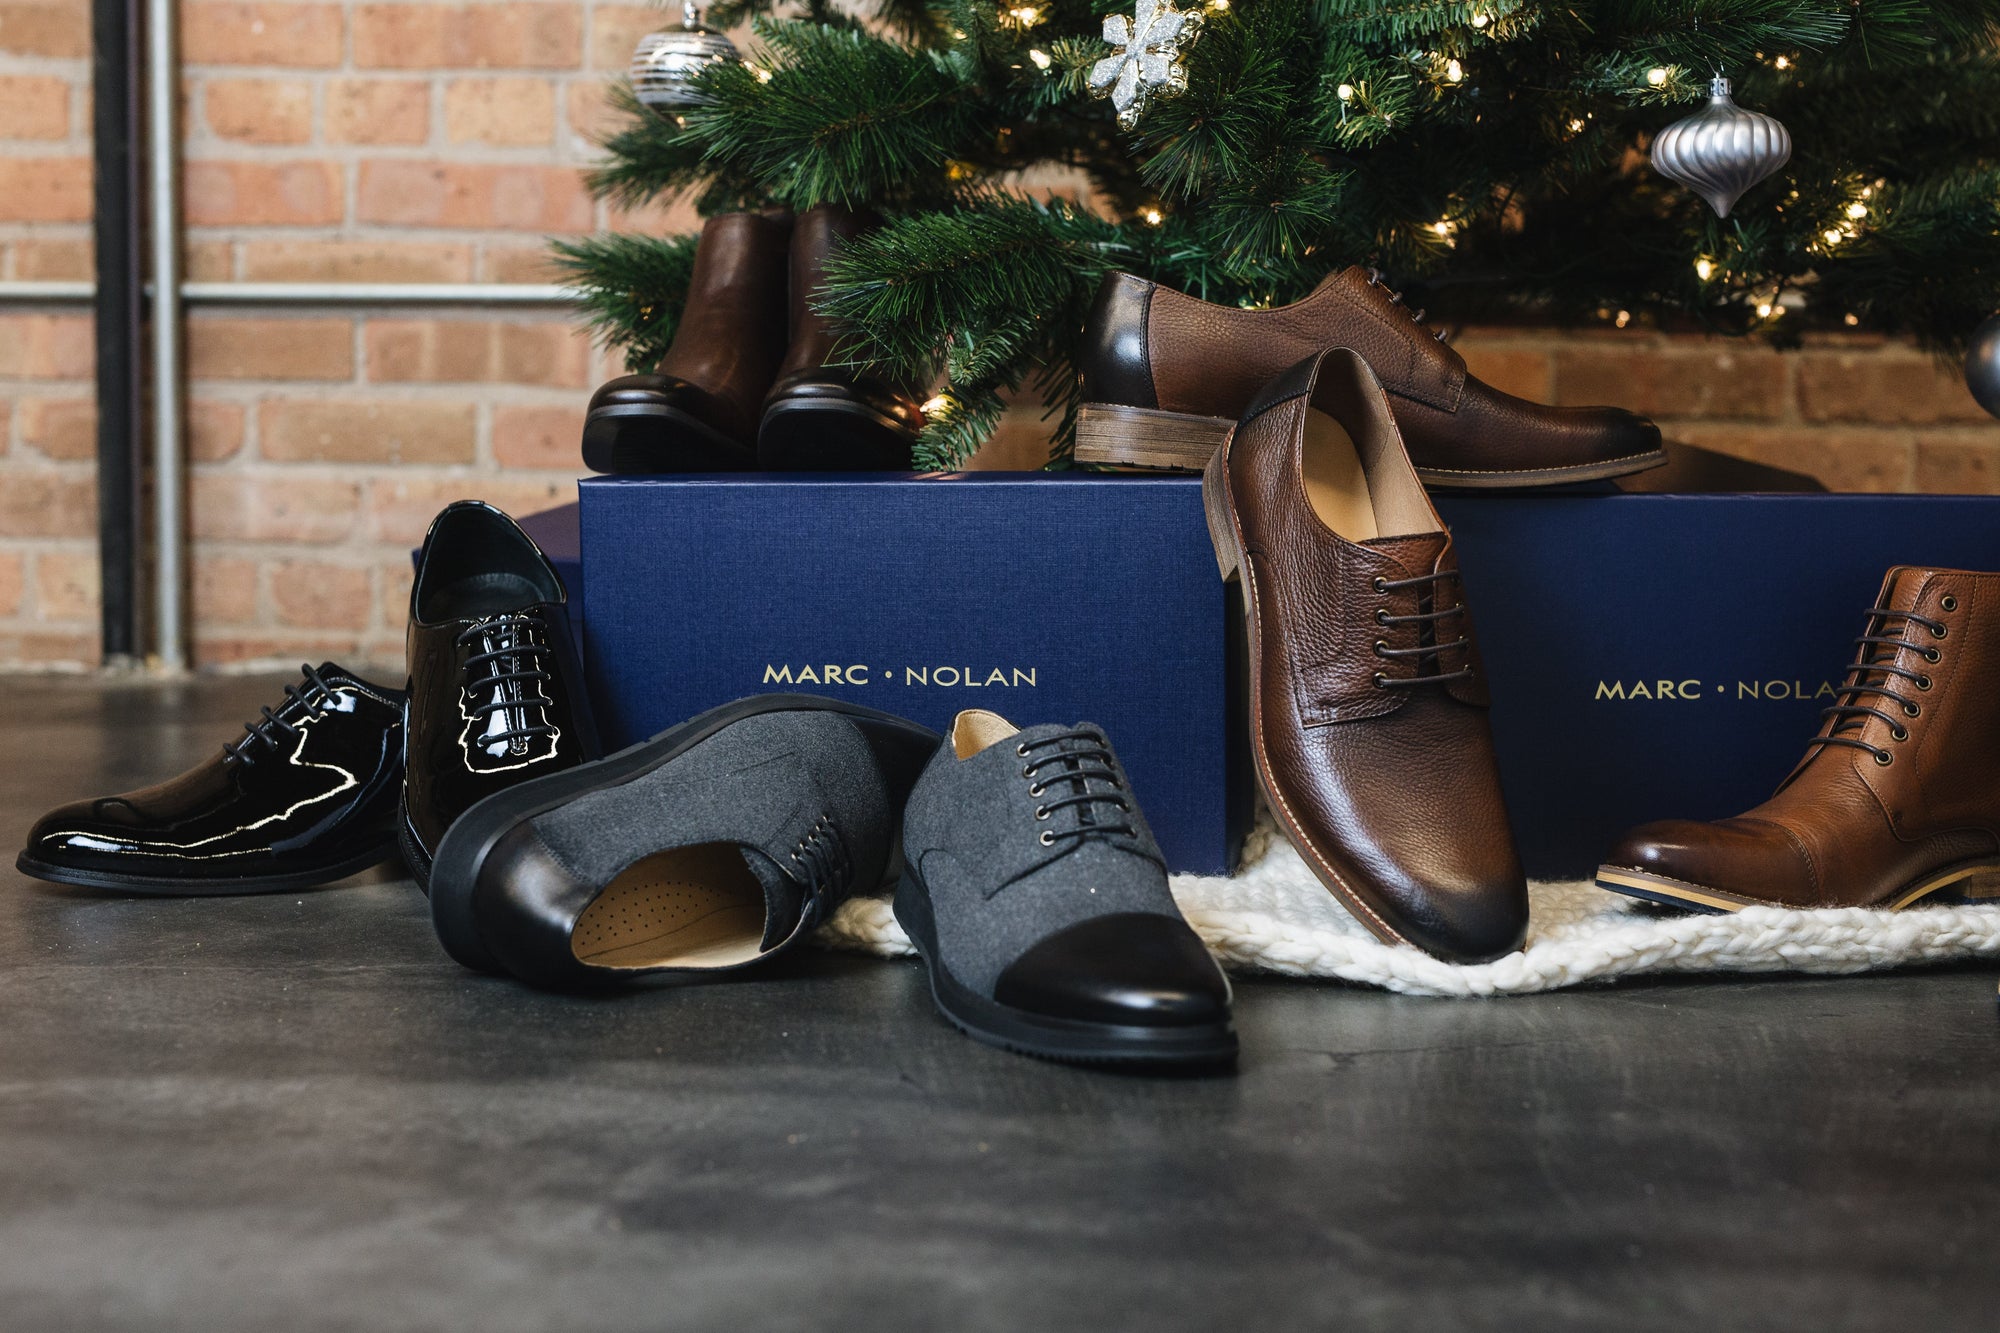 Looking for the perfect gift for your husband, boyfriend, brother or father? Marc Nolan shoes make a great gift for all the guys in your life. 